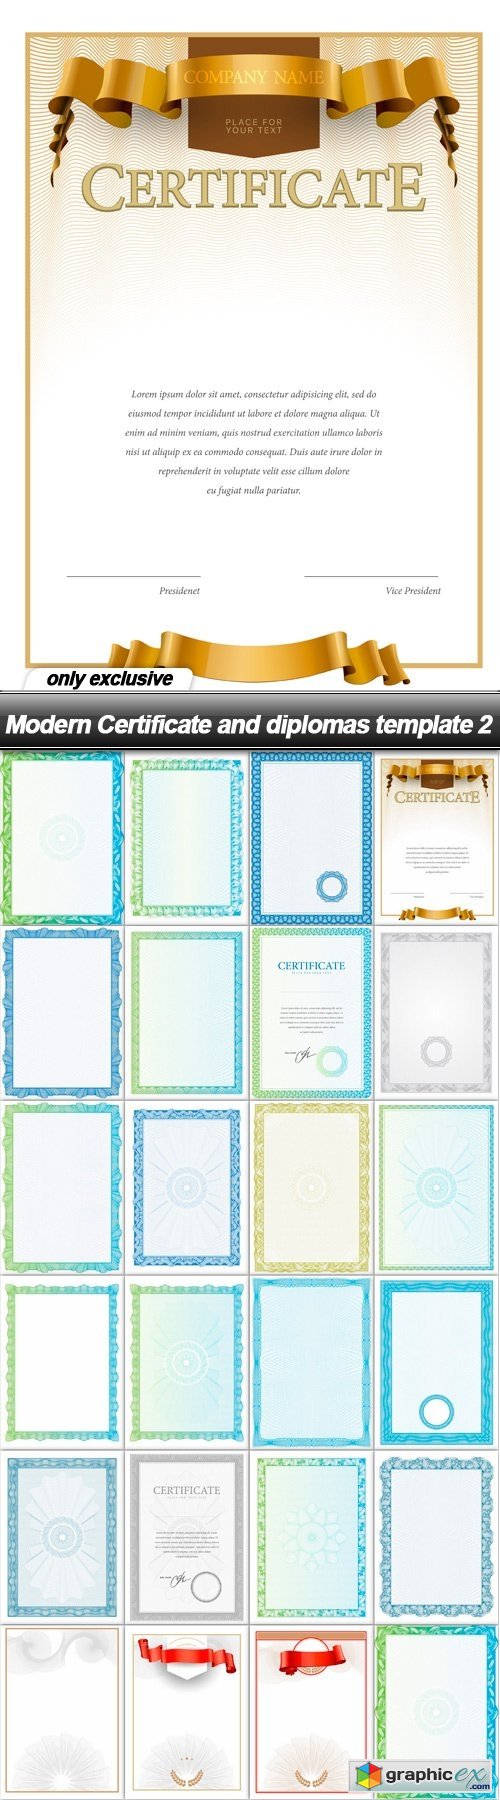 Modern Certificate and diplomas template 2 - 23 EPS